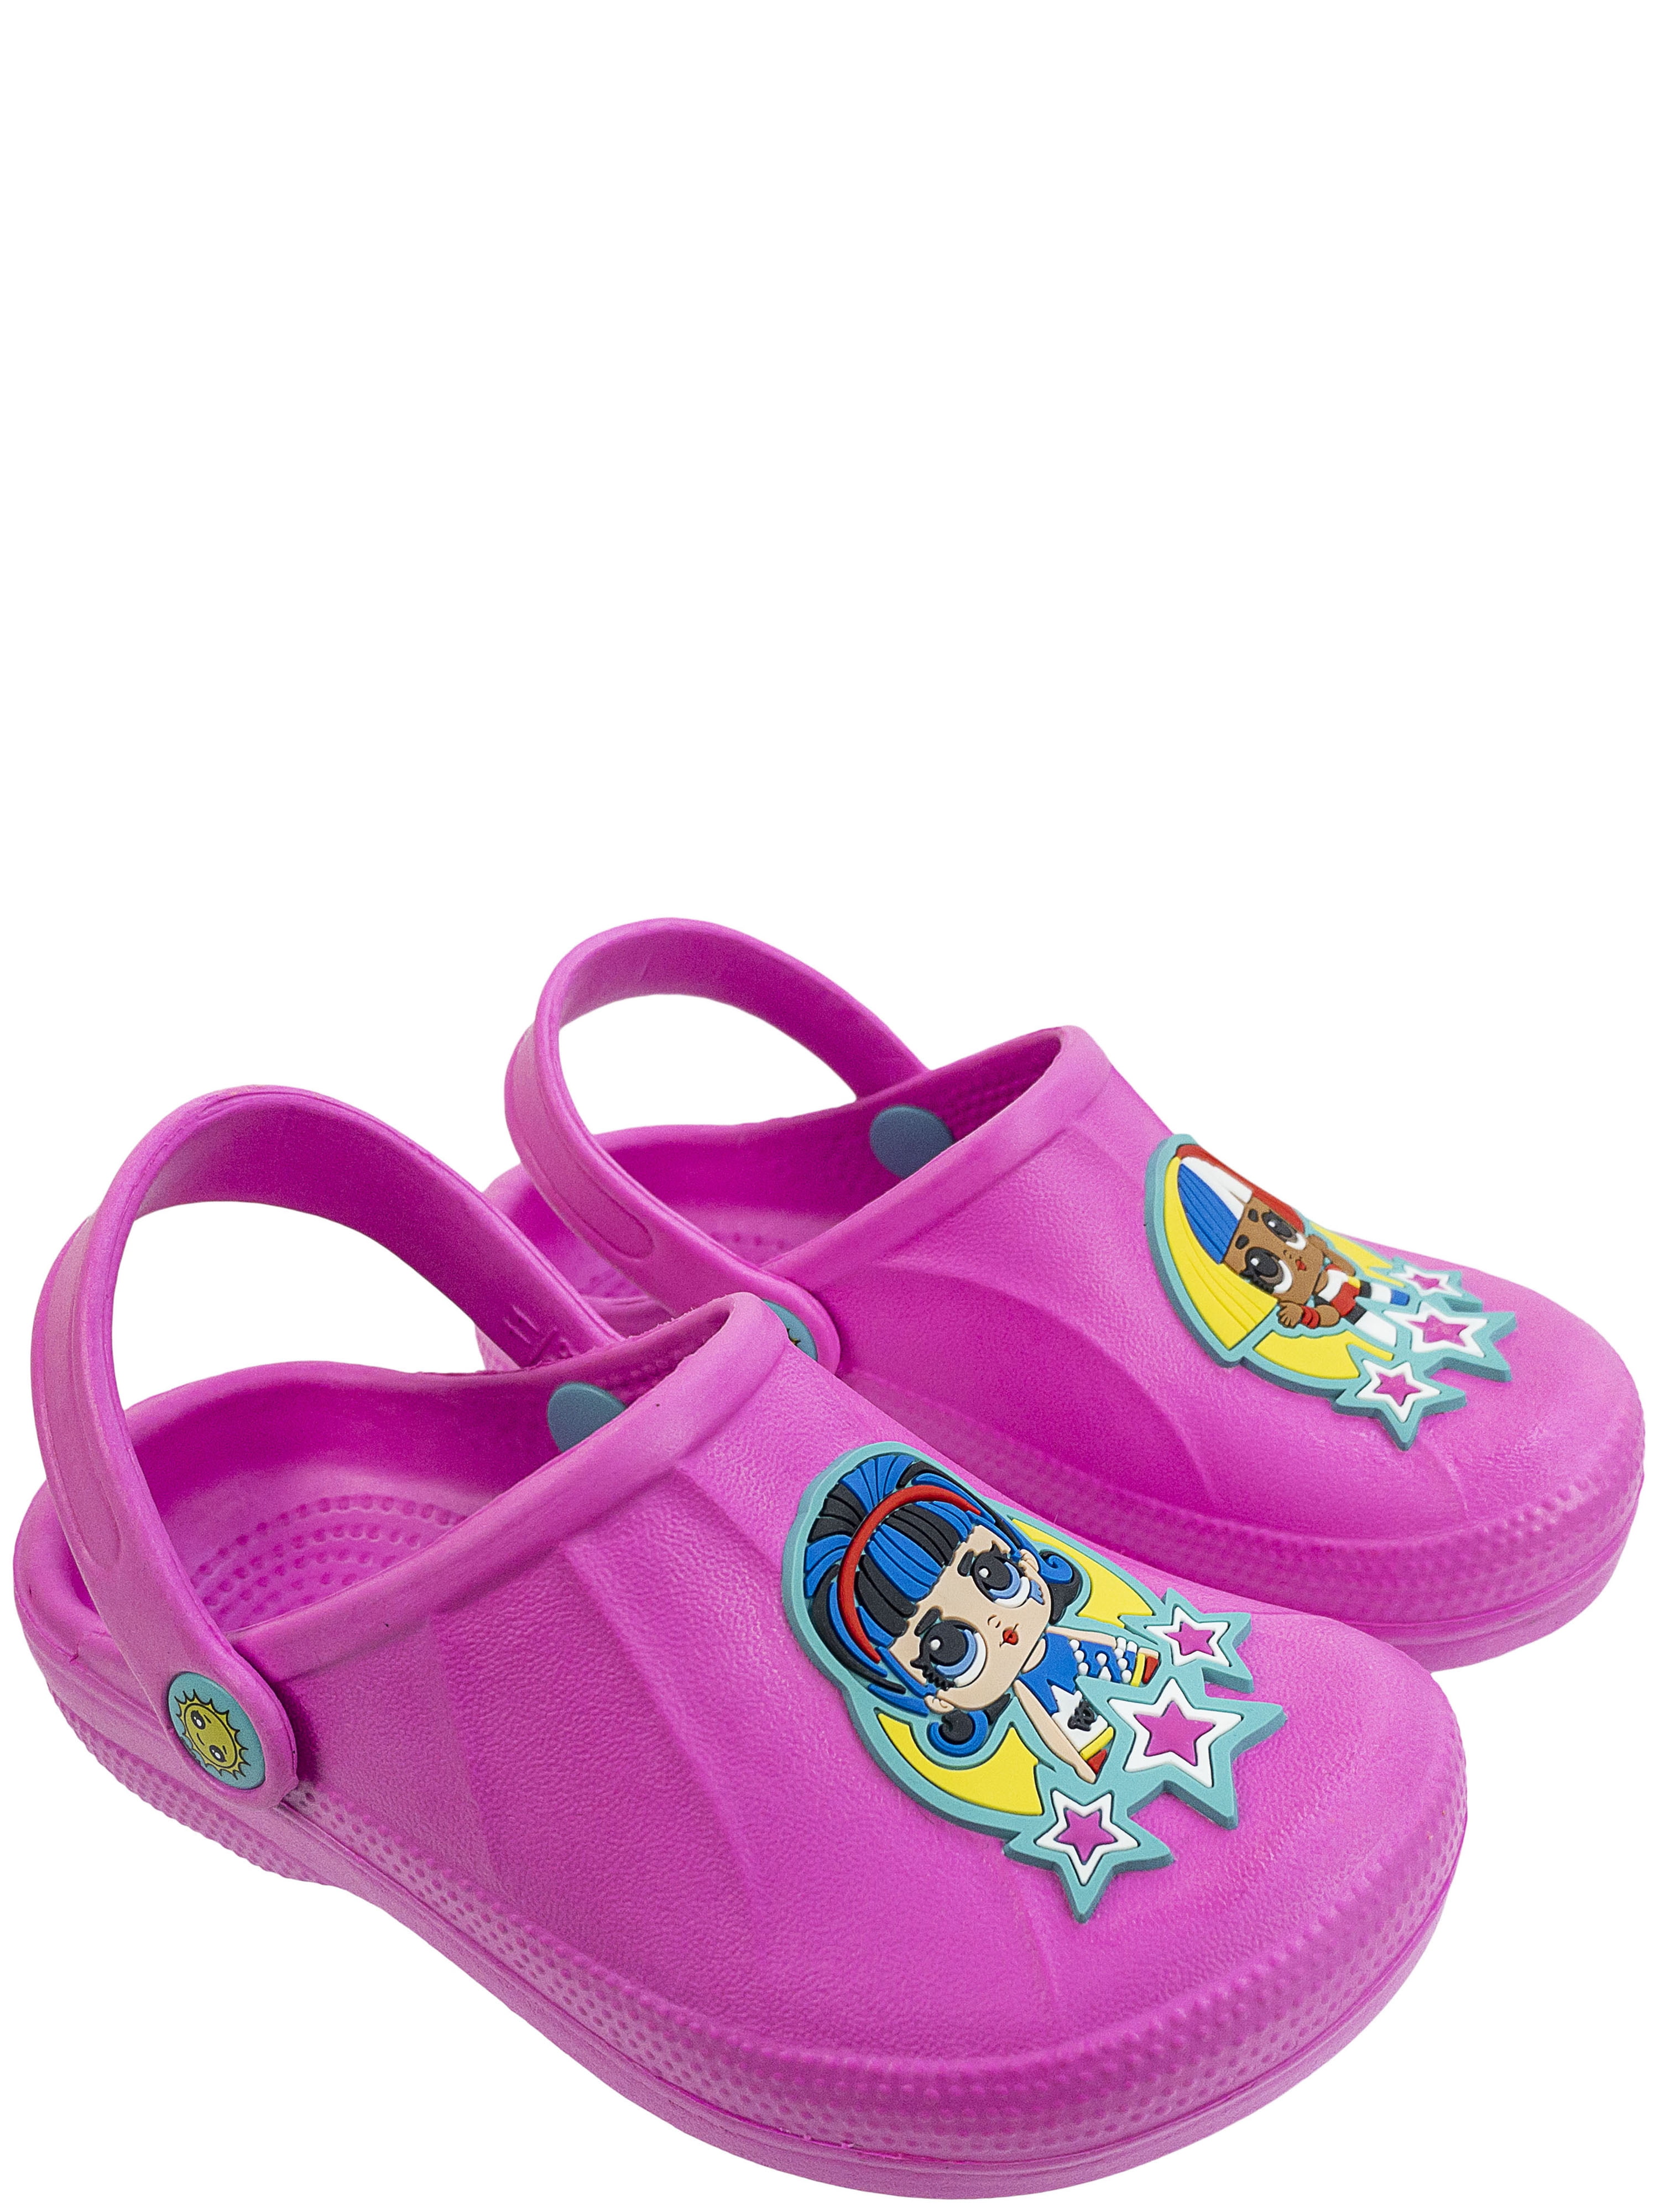 LOL Surprise beach girls kids jelly shoes sandals pink UK Size 